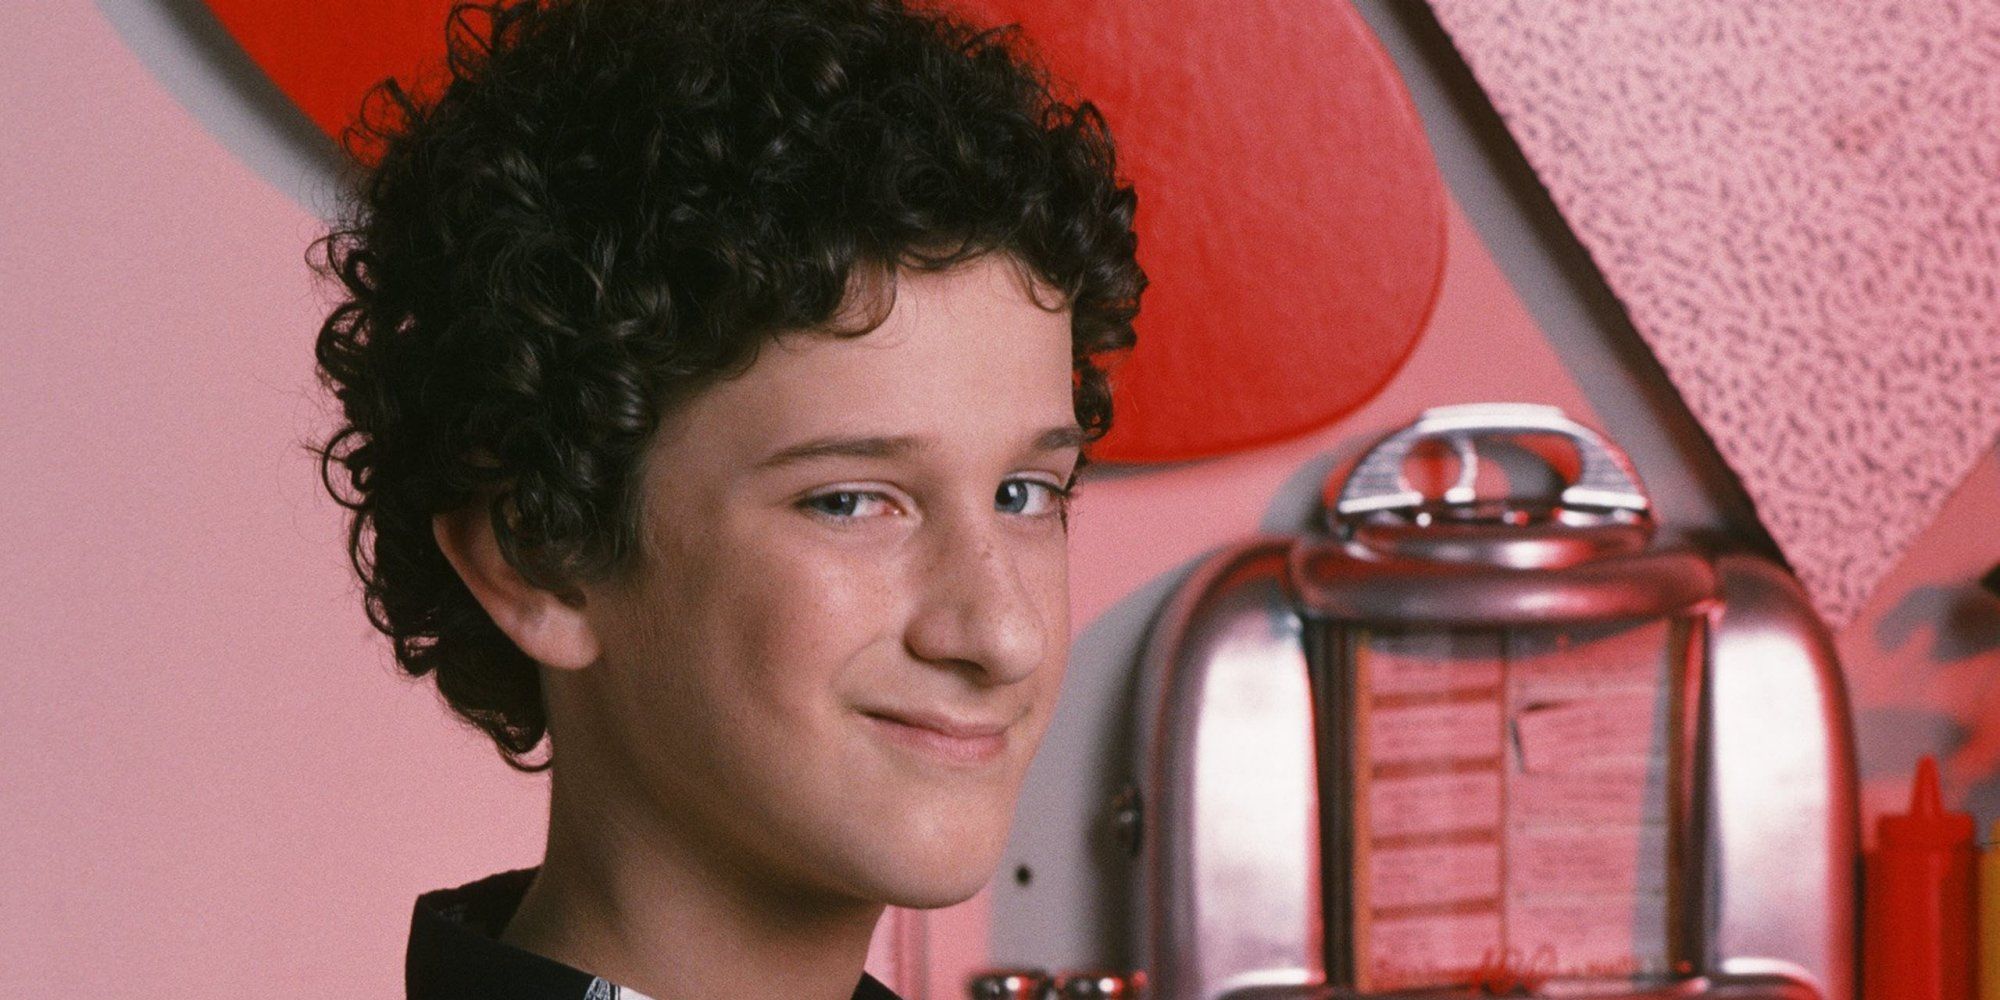 Screech saved by the bell